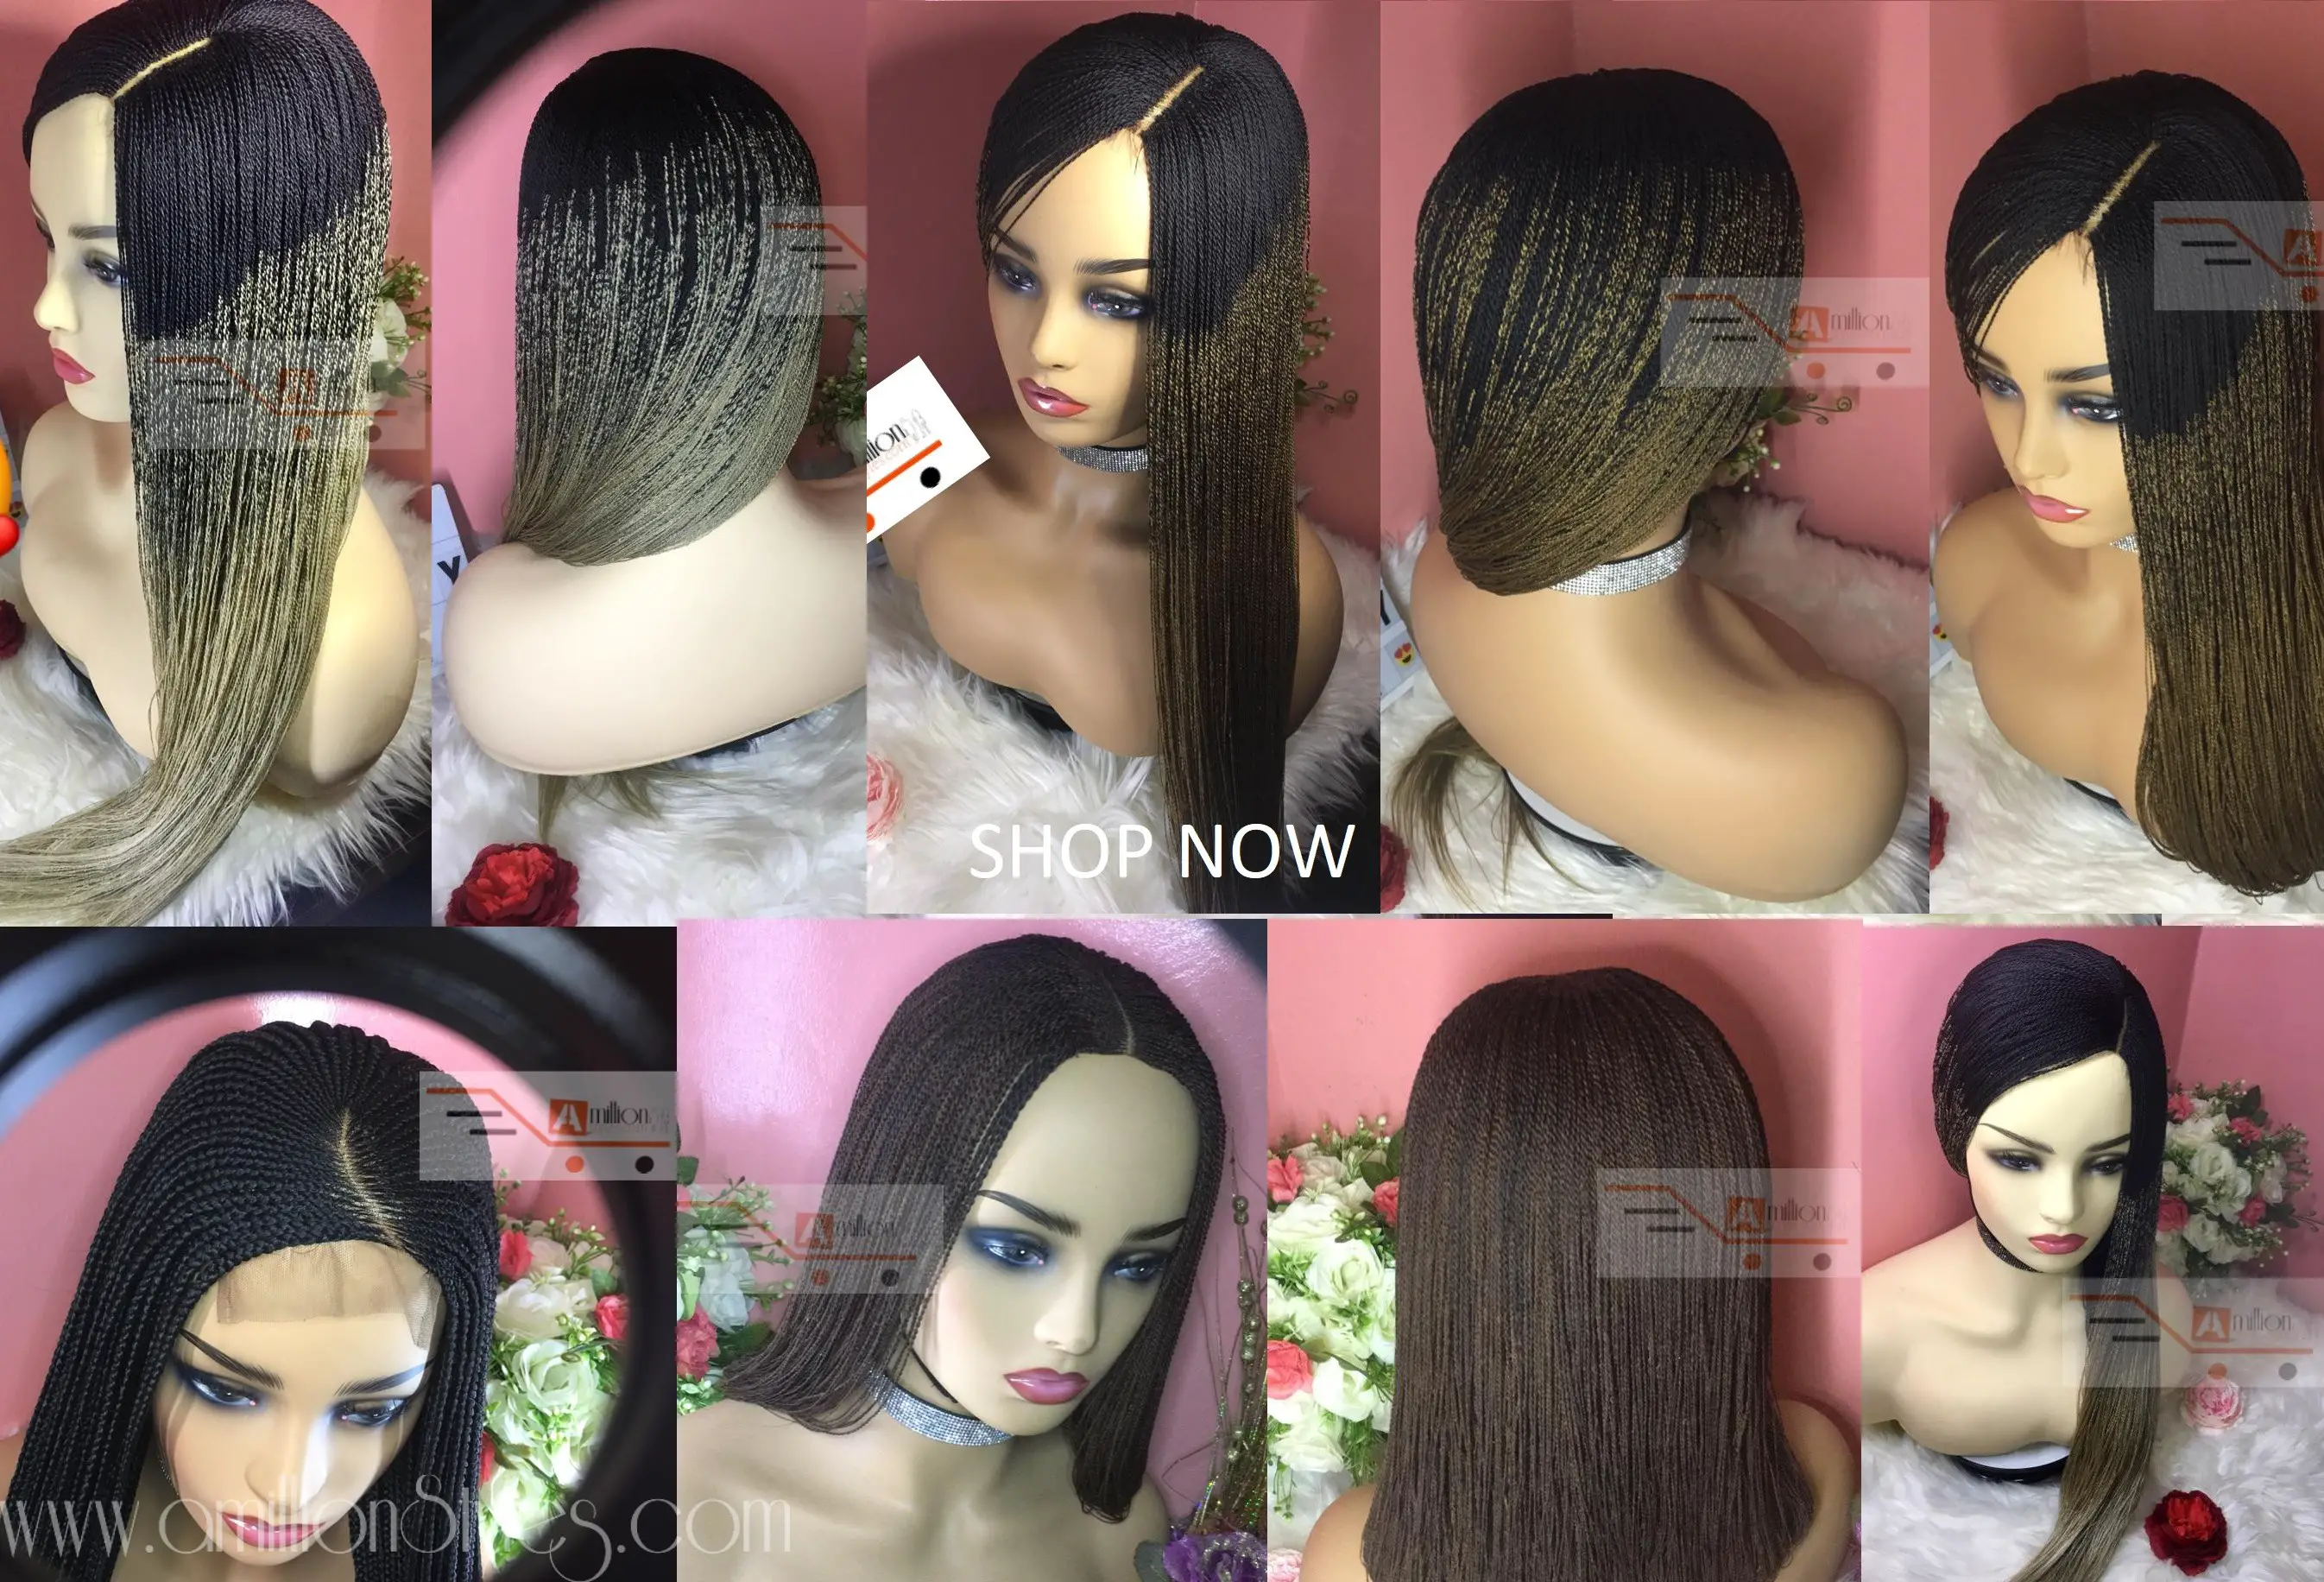 Need Affordable Braided Wigs ? Check here